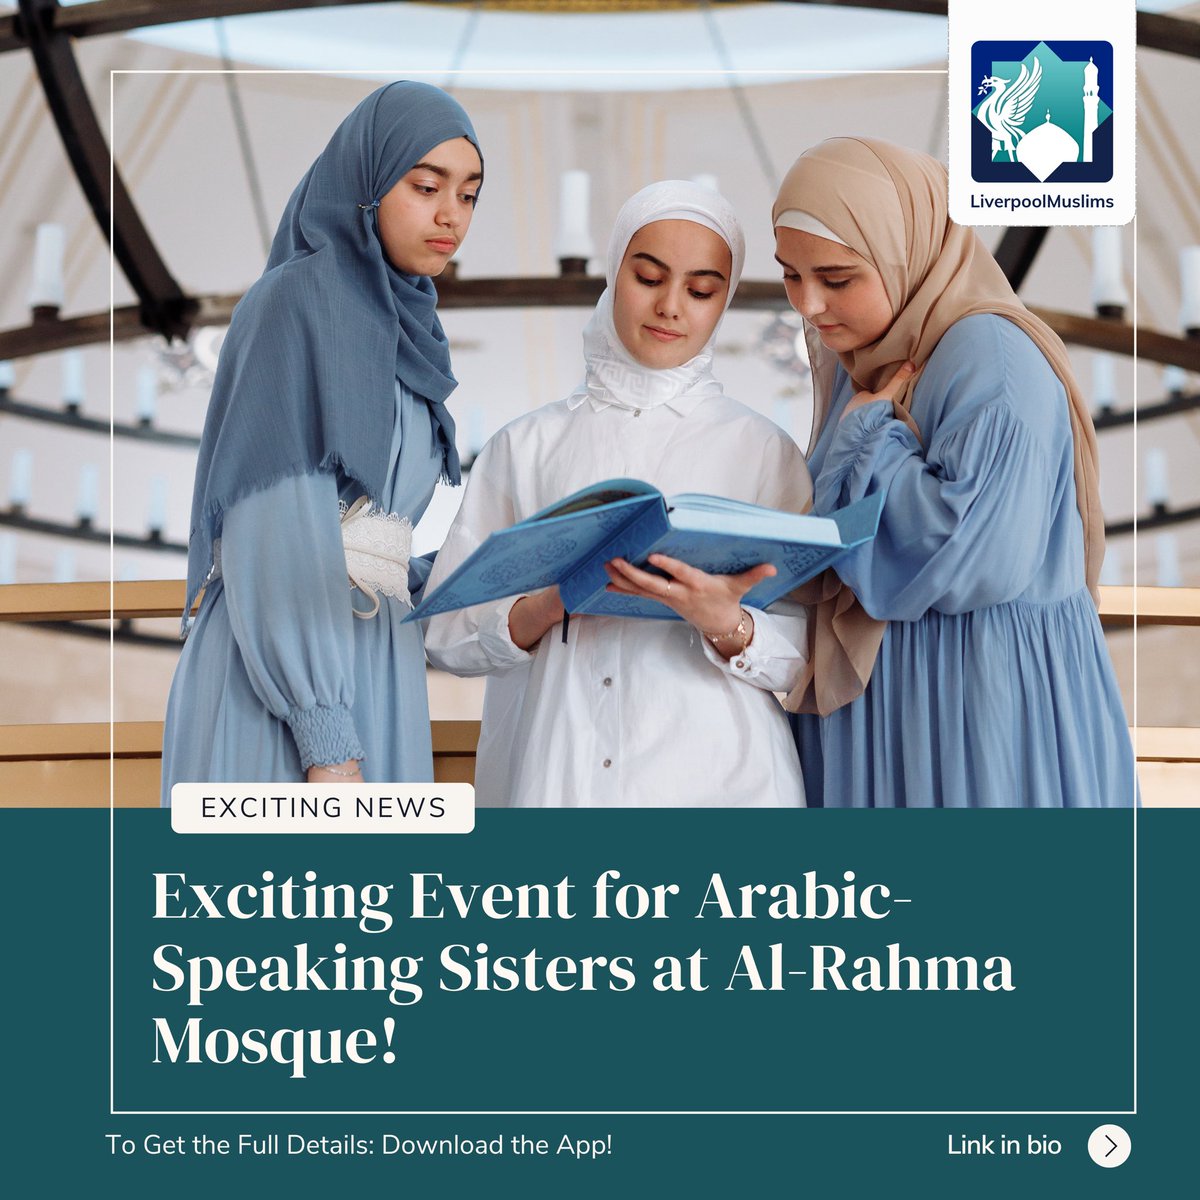 Good news, sisters! 🌟 Join us for an empowering event at Al-Rahma Mosque, dive into discussions on navigating life in the UK, overcoming challenges, and seizing opportunities. Don’t miss out! May 1st, 10:30 AM - 1:30 PM. #LiverpoolMuslimsApp #MuslimCommunityLiverpool